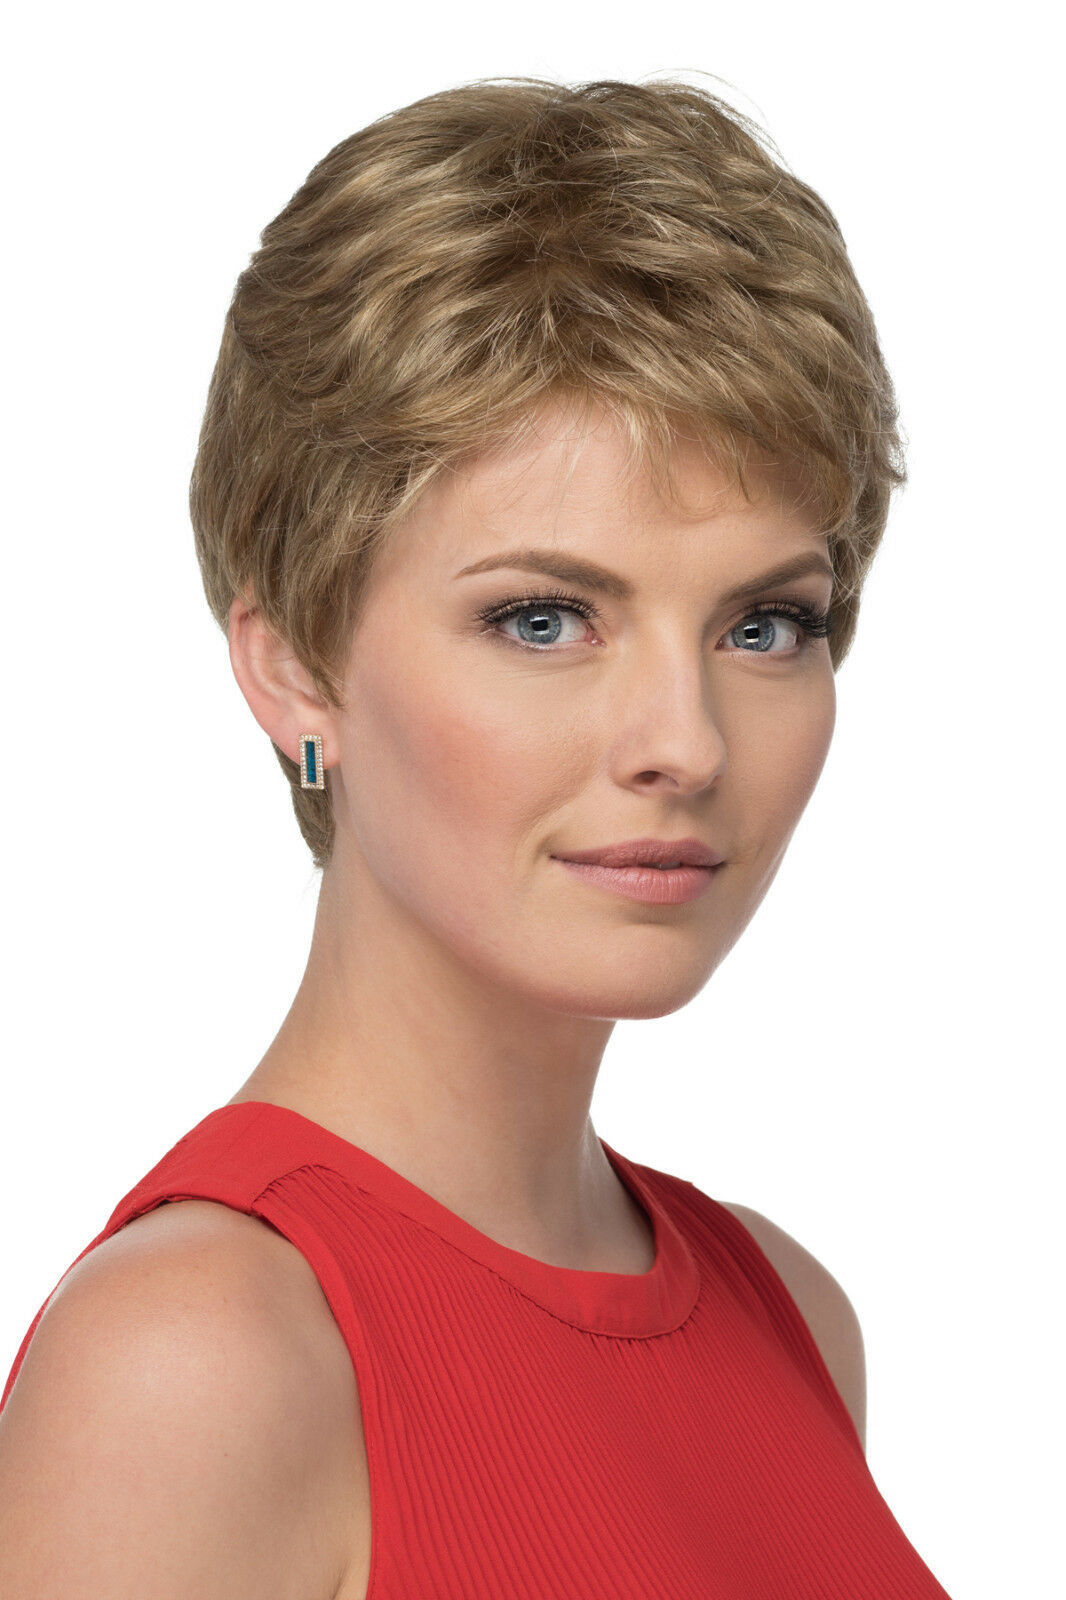 PETITE COBY Wig by ESTETICA, *ALL COLORS!* Mono Top, Pixie Cut, Genuine, New